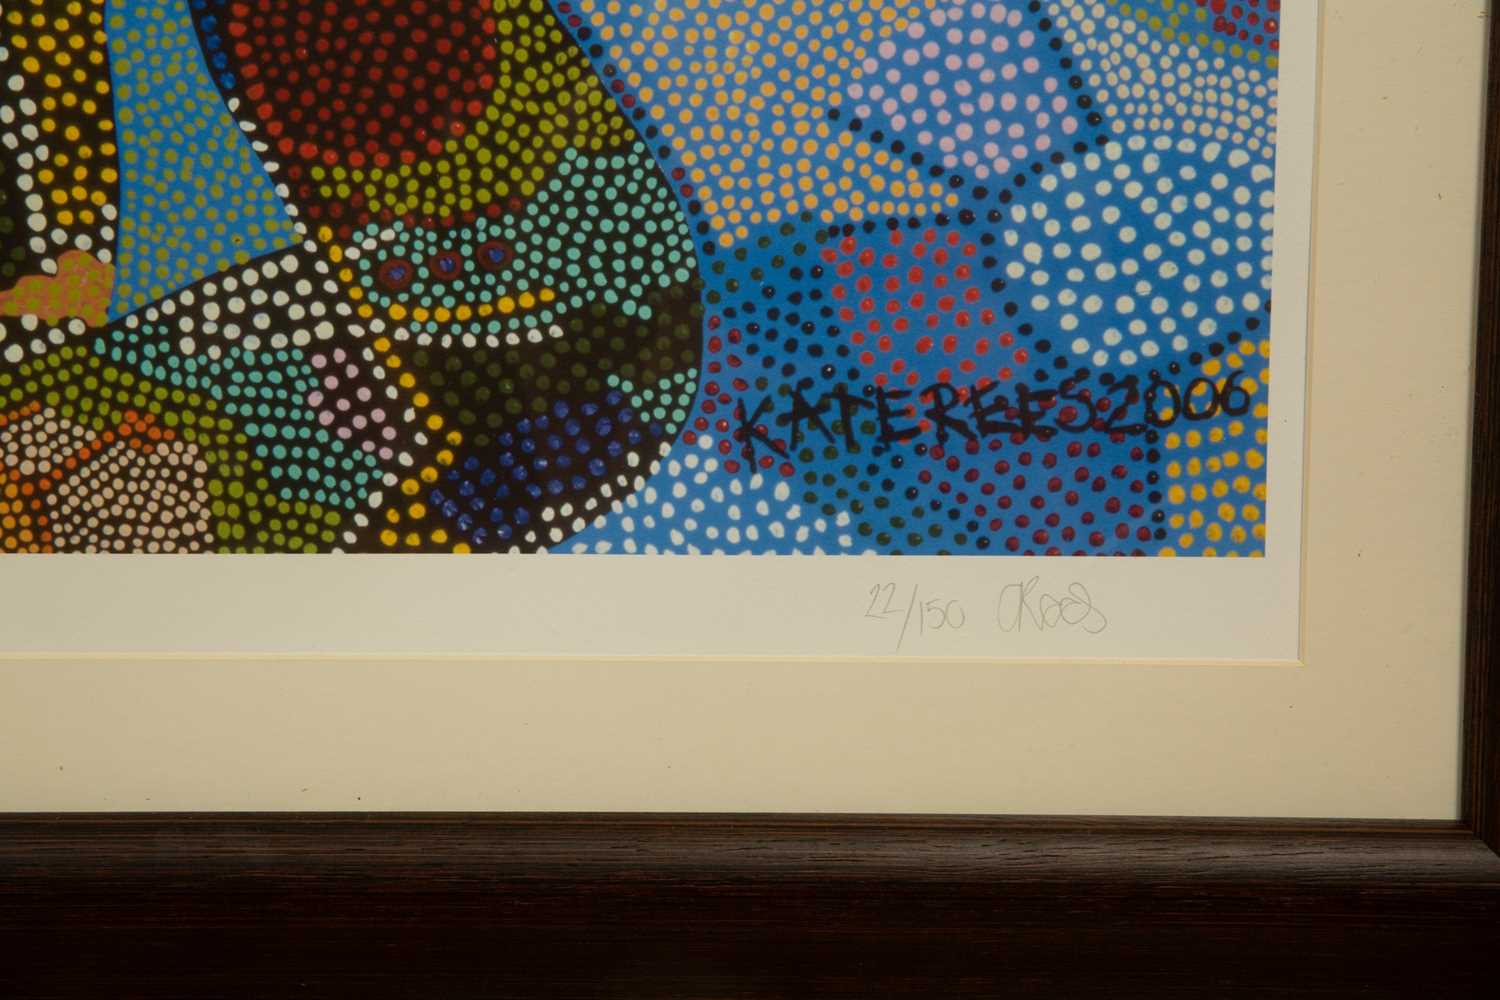 Kate Rees (20th century school) 'Aboriginal Art', limited edition print, signed in pencil lower - Image 5 of 5